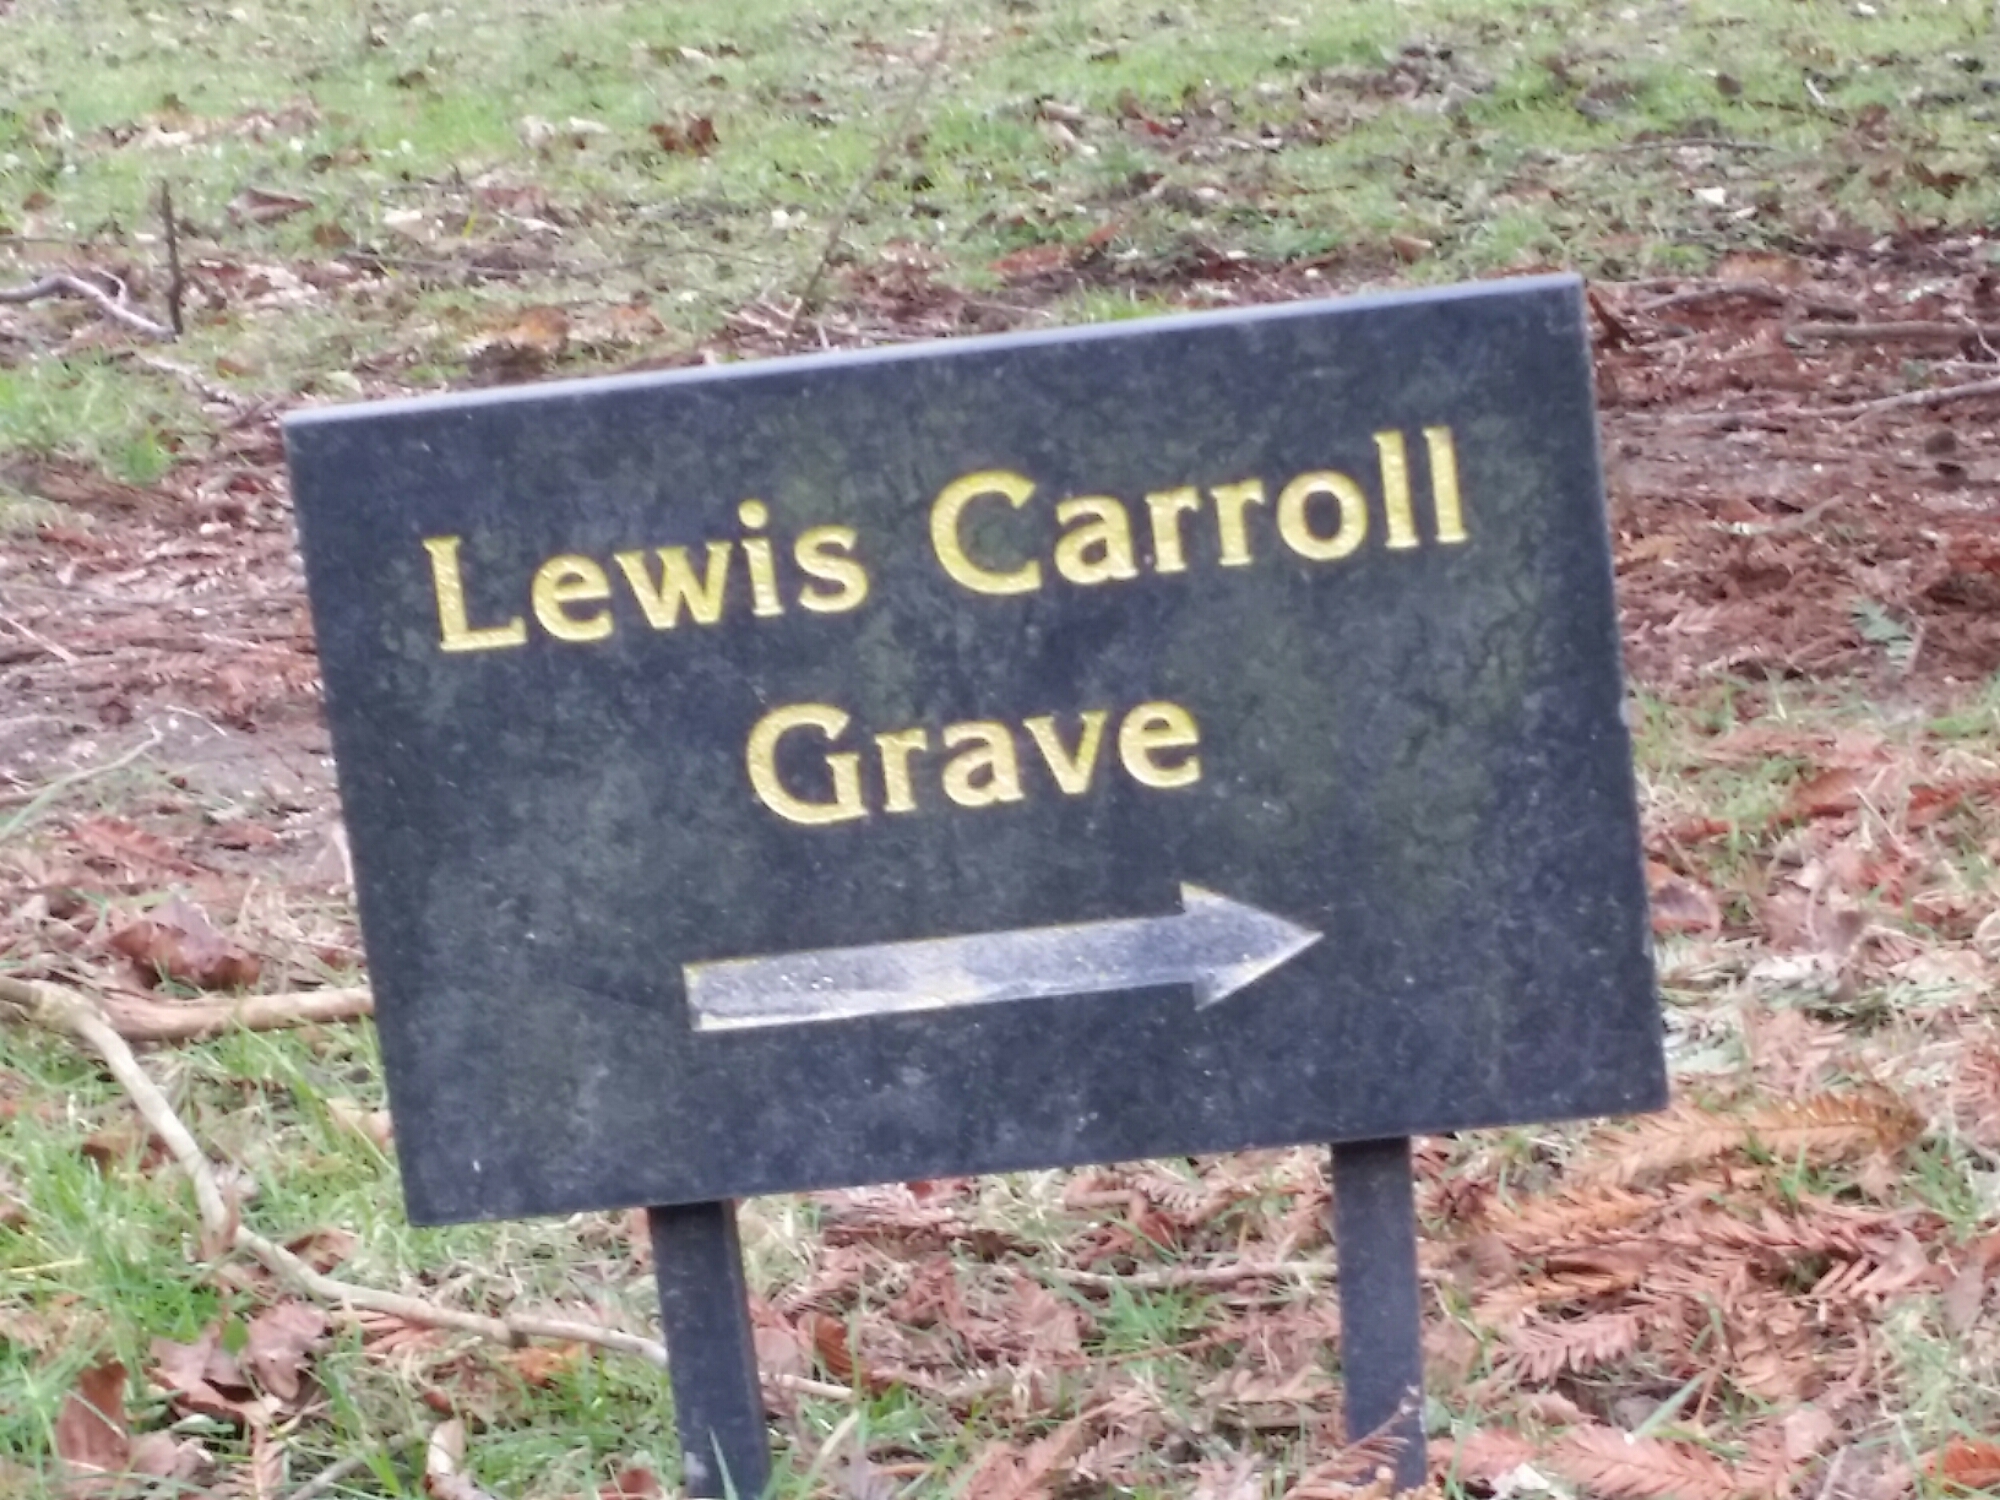 Sign to Lewis Carroll's grave